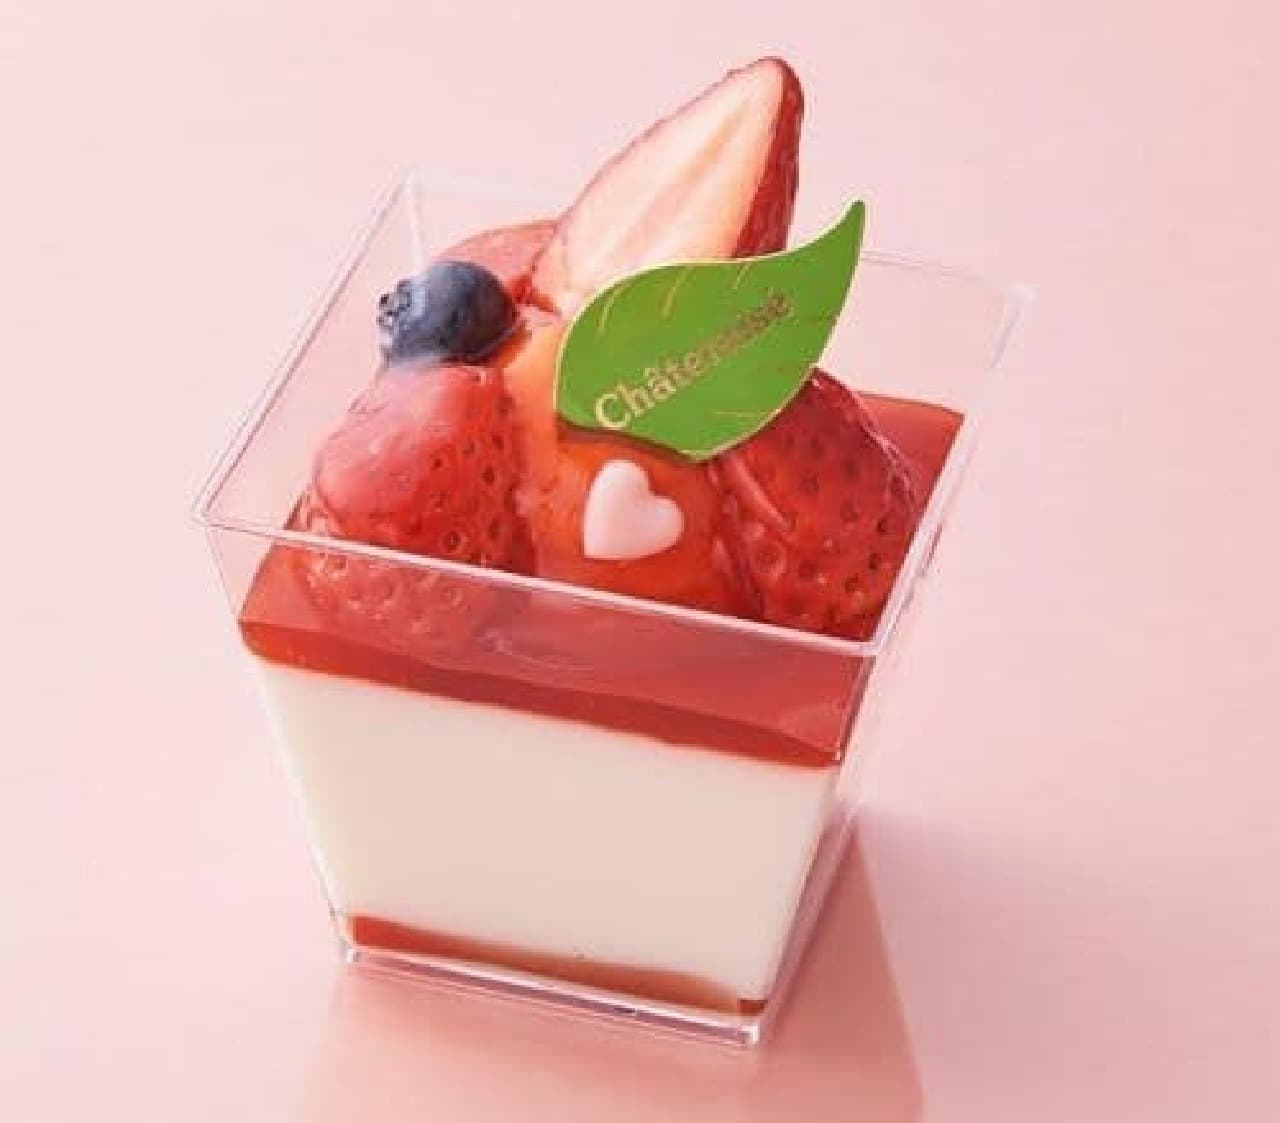 Chateraise "Mother's Day Strawberry Annin Tofu"